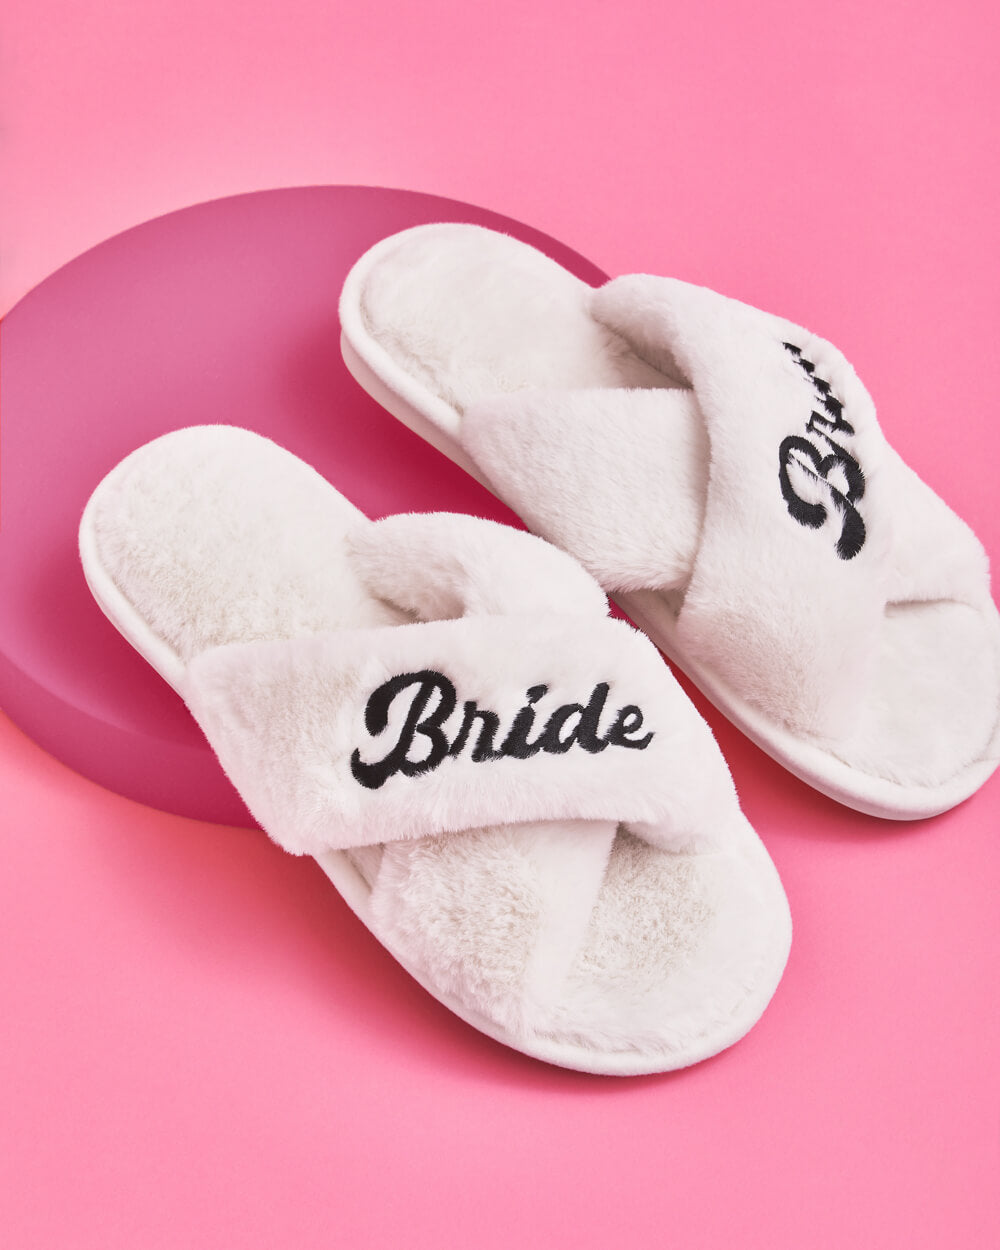 Classic Bride Slippers - white fur slippers